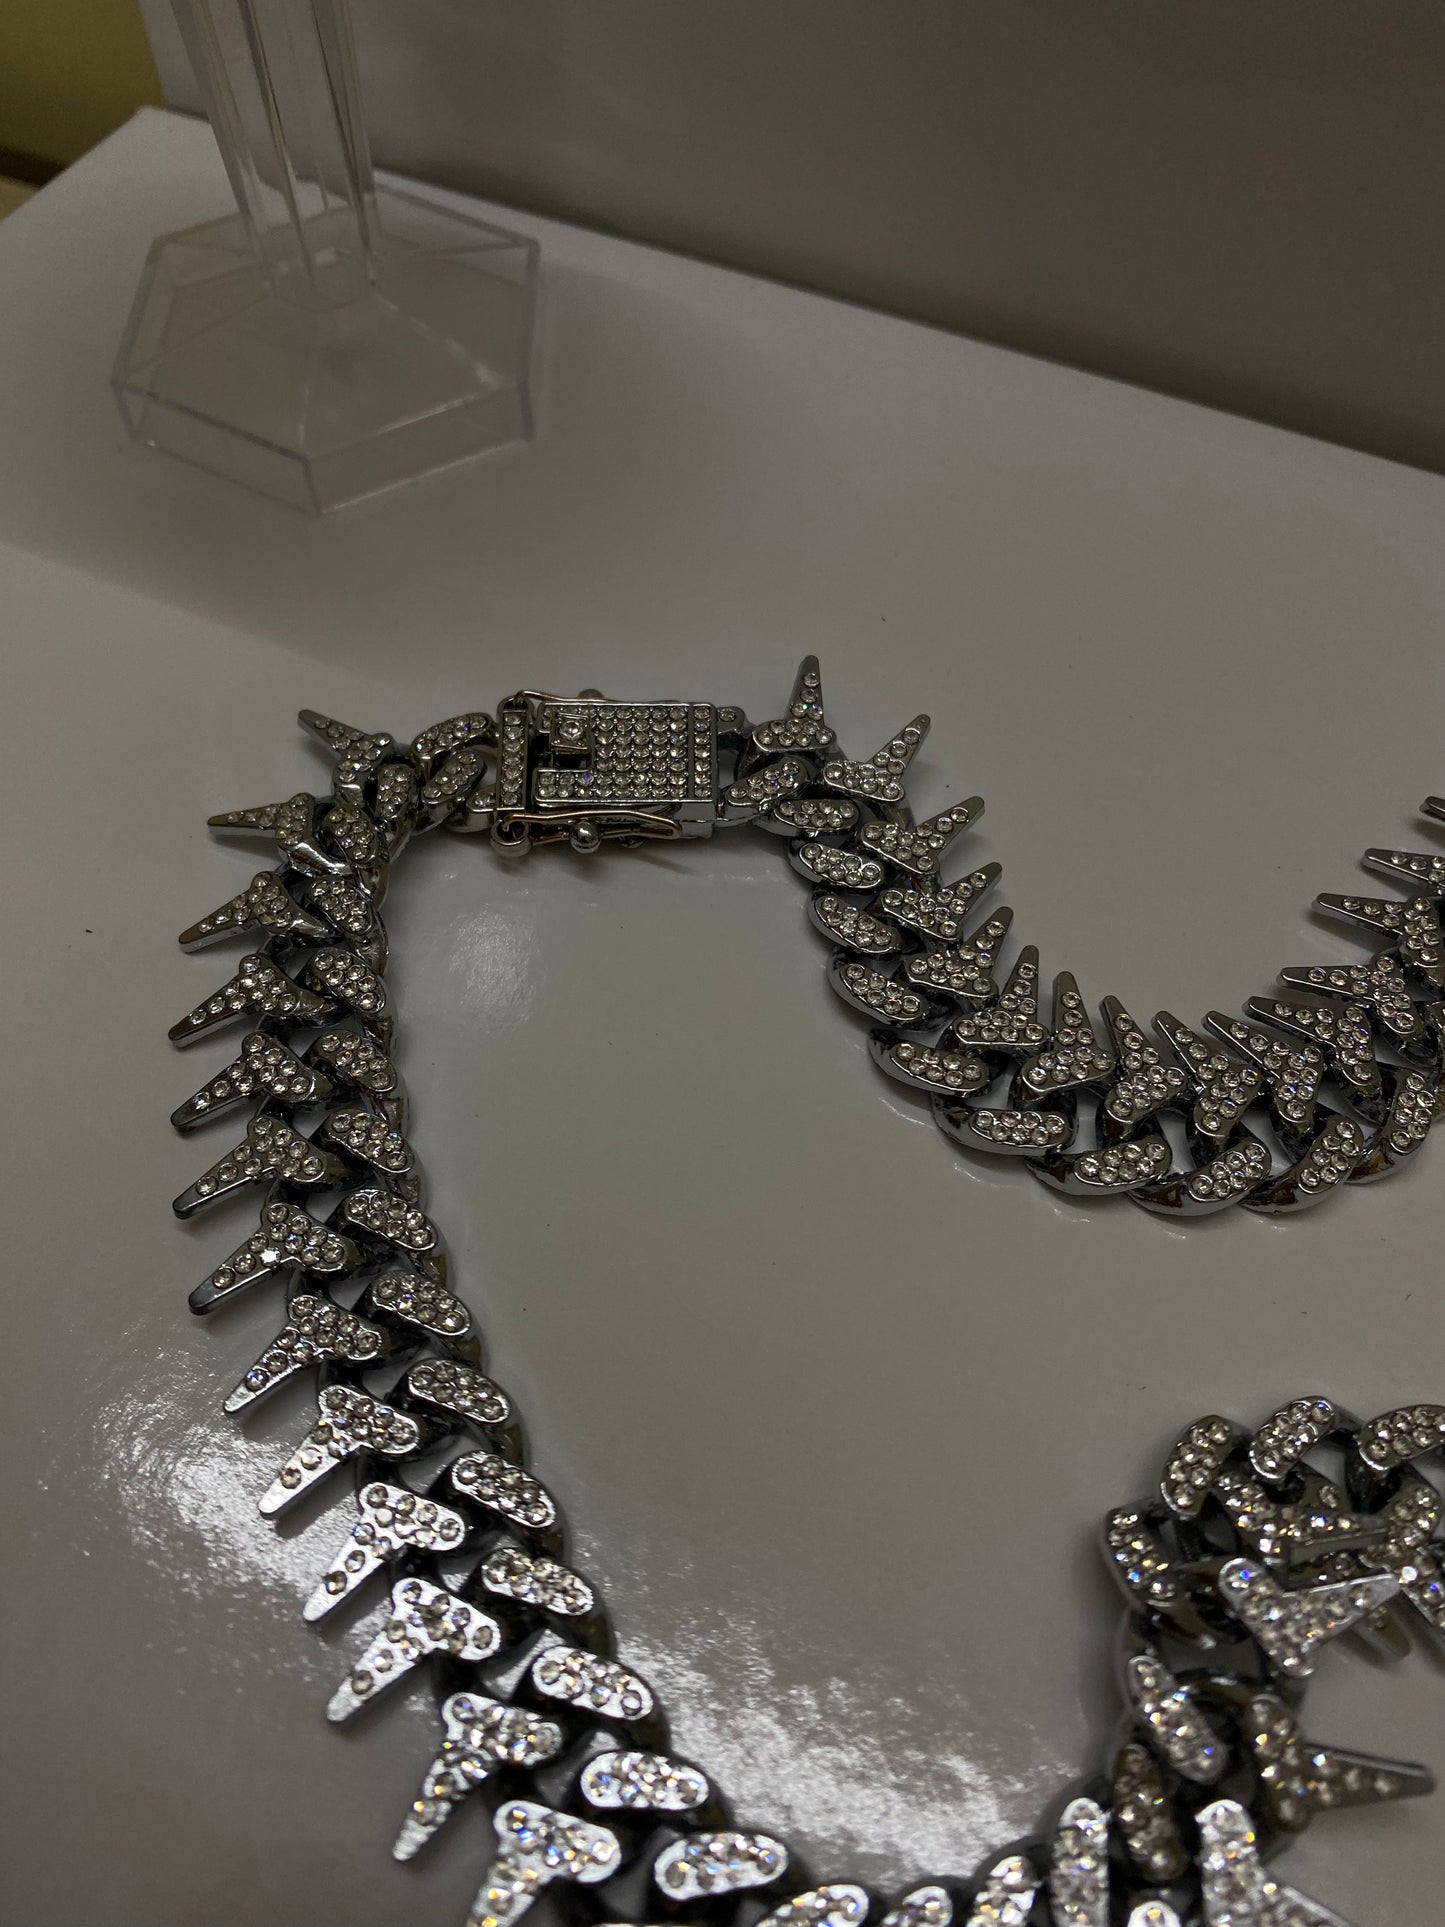 Icy spiky chain